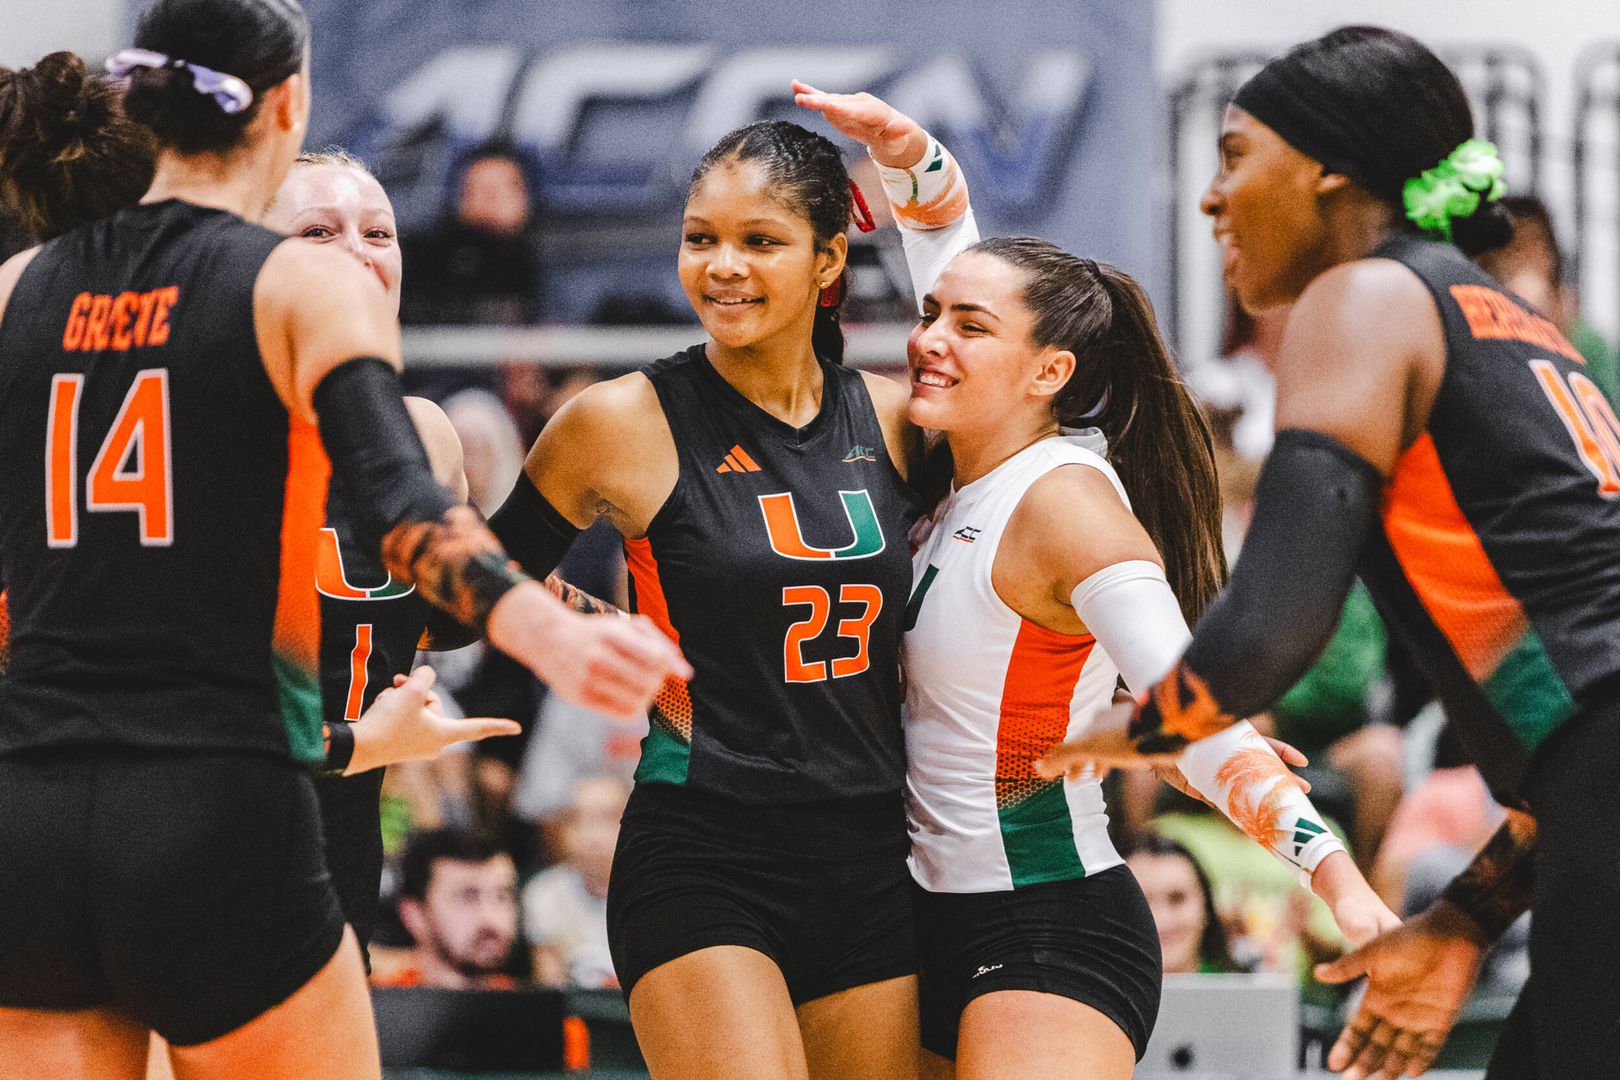 Canes Prevail Over NC State In Five-Set Thriller